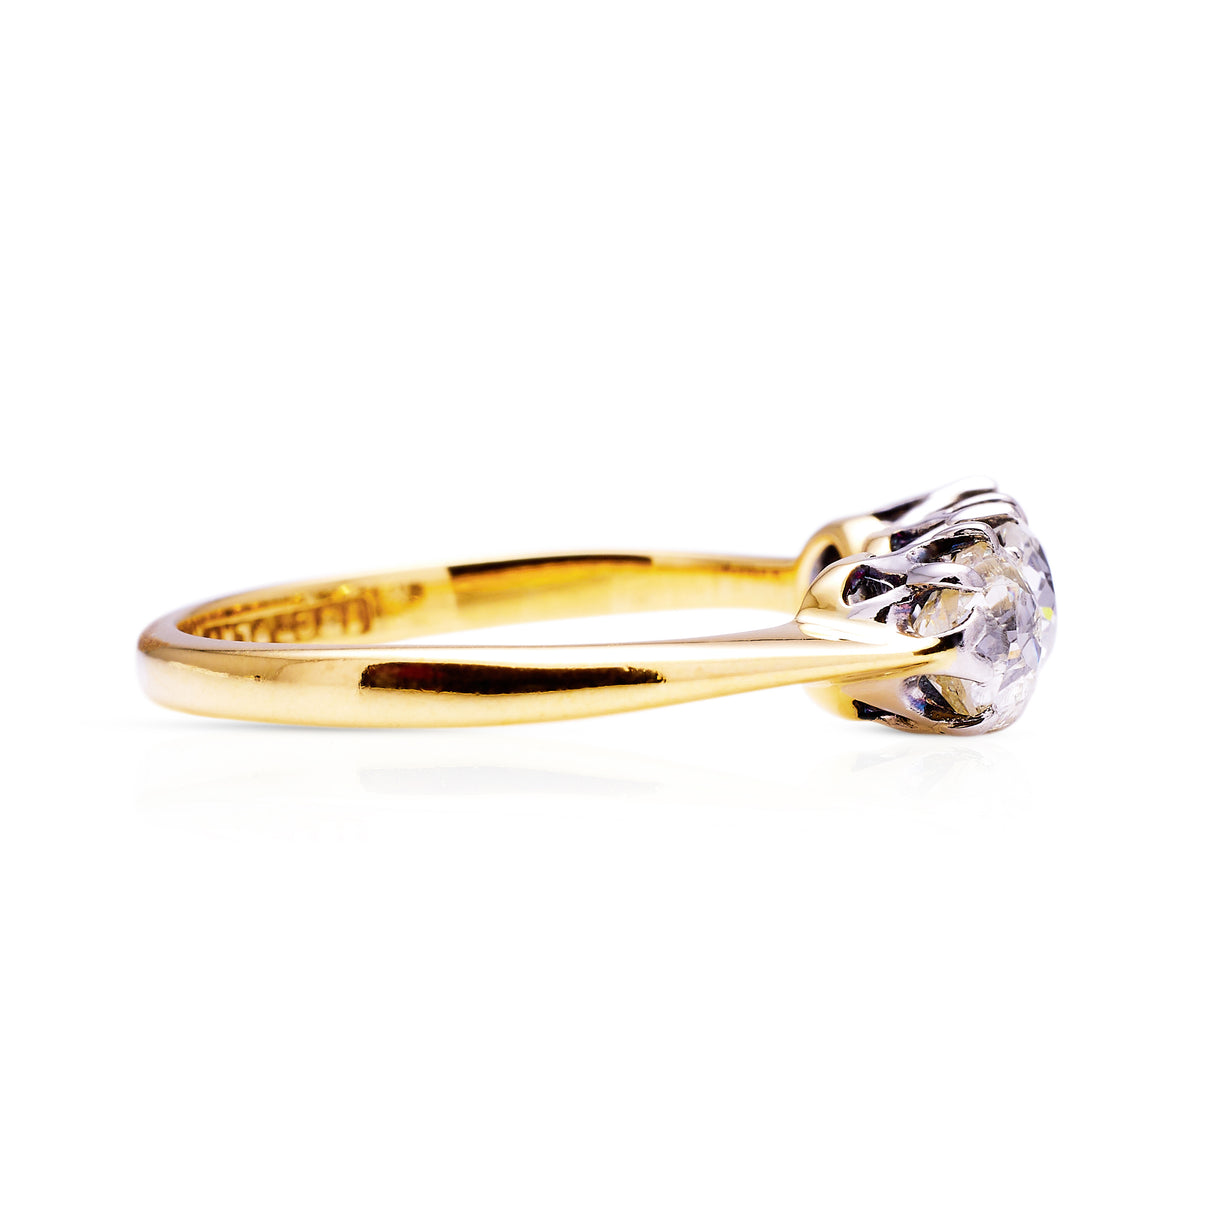 antique three stone diamond engagement ring, 18ct yellow gold band, side view. 